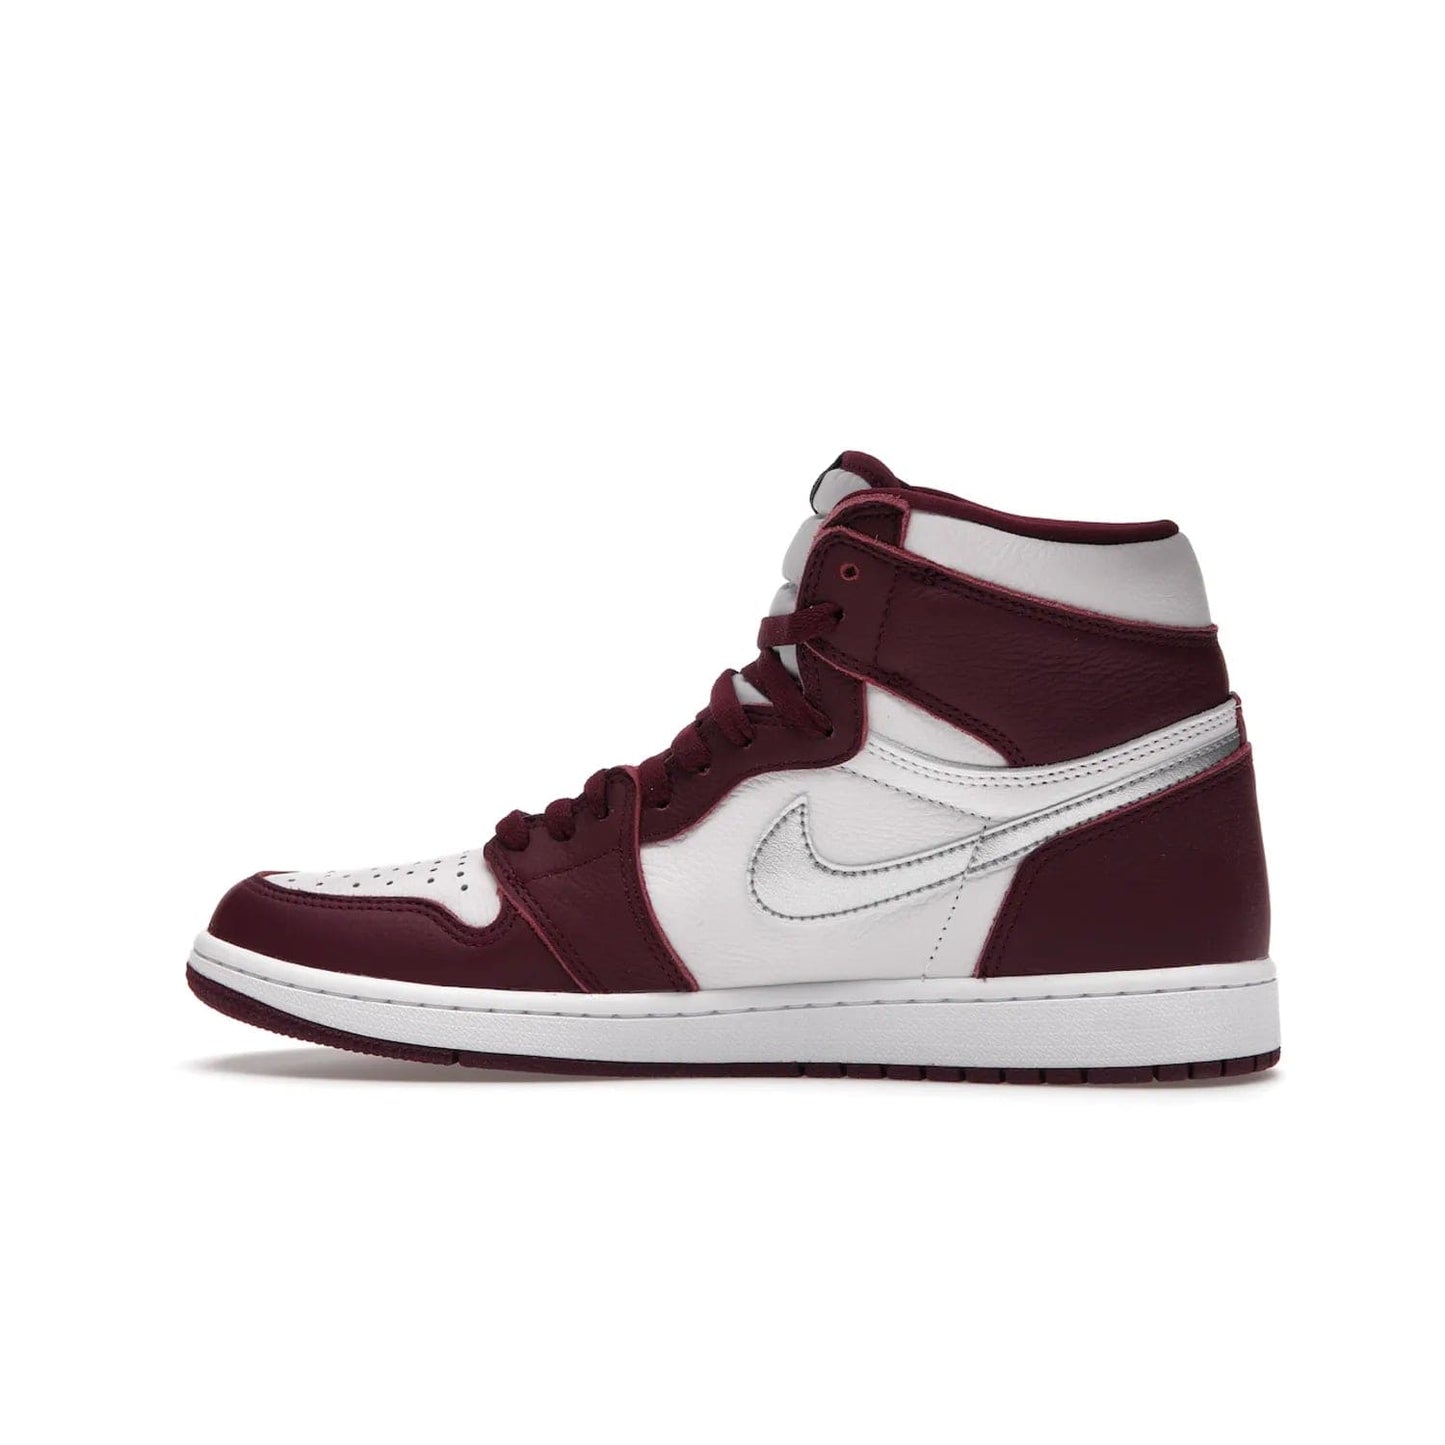 Jordan 1 Retro High OG Bordeaux - Image 20 - Only at www.BallersClubKickz.com - Shop the classic Air Jordan 1 High Bordeaux with a modern high-top cut. The timeless Bordeaux and White-Metallic Silver colorway, releasing Nov 20, 2021, is perfect for practice or a night out.